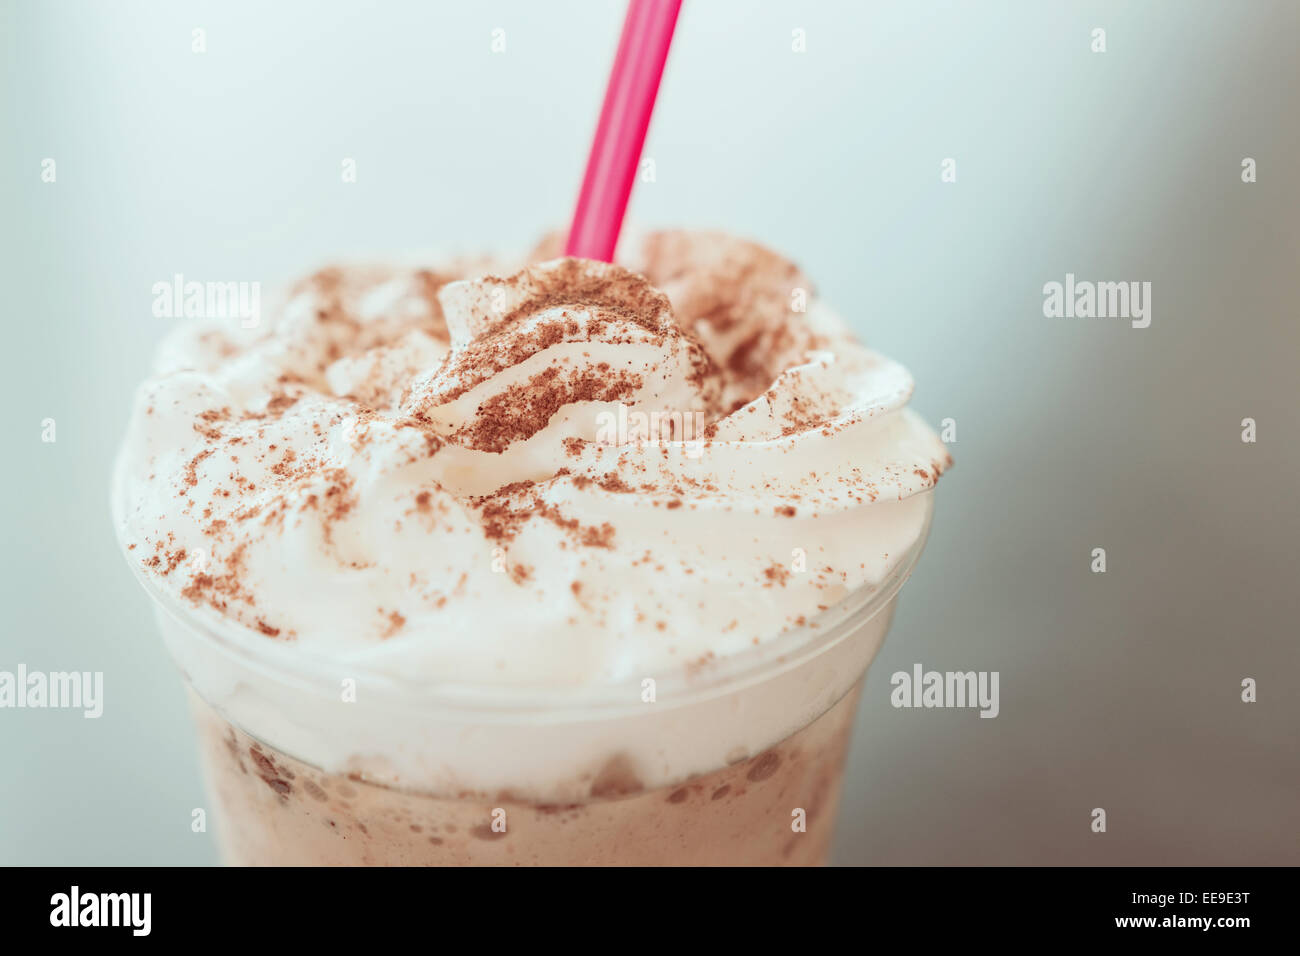 Retro Photo Of Frappe Iced Coffee Drink Stock Photo